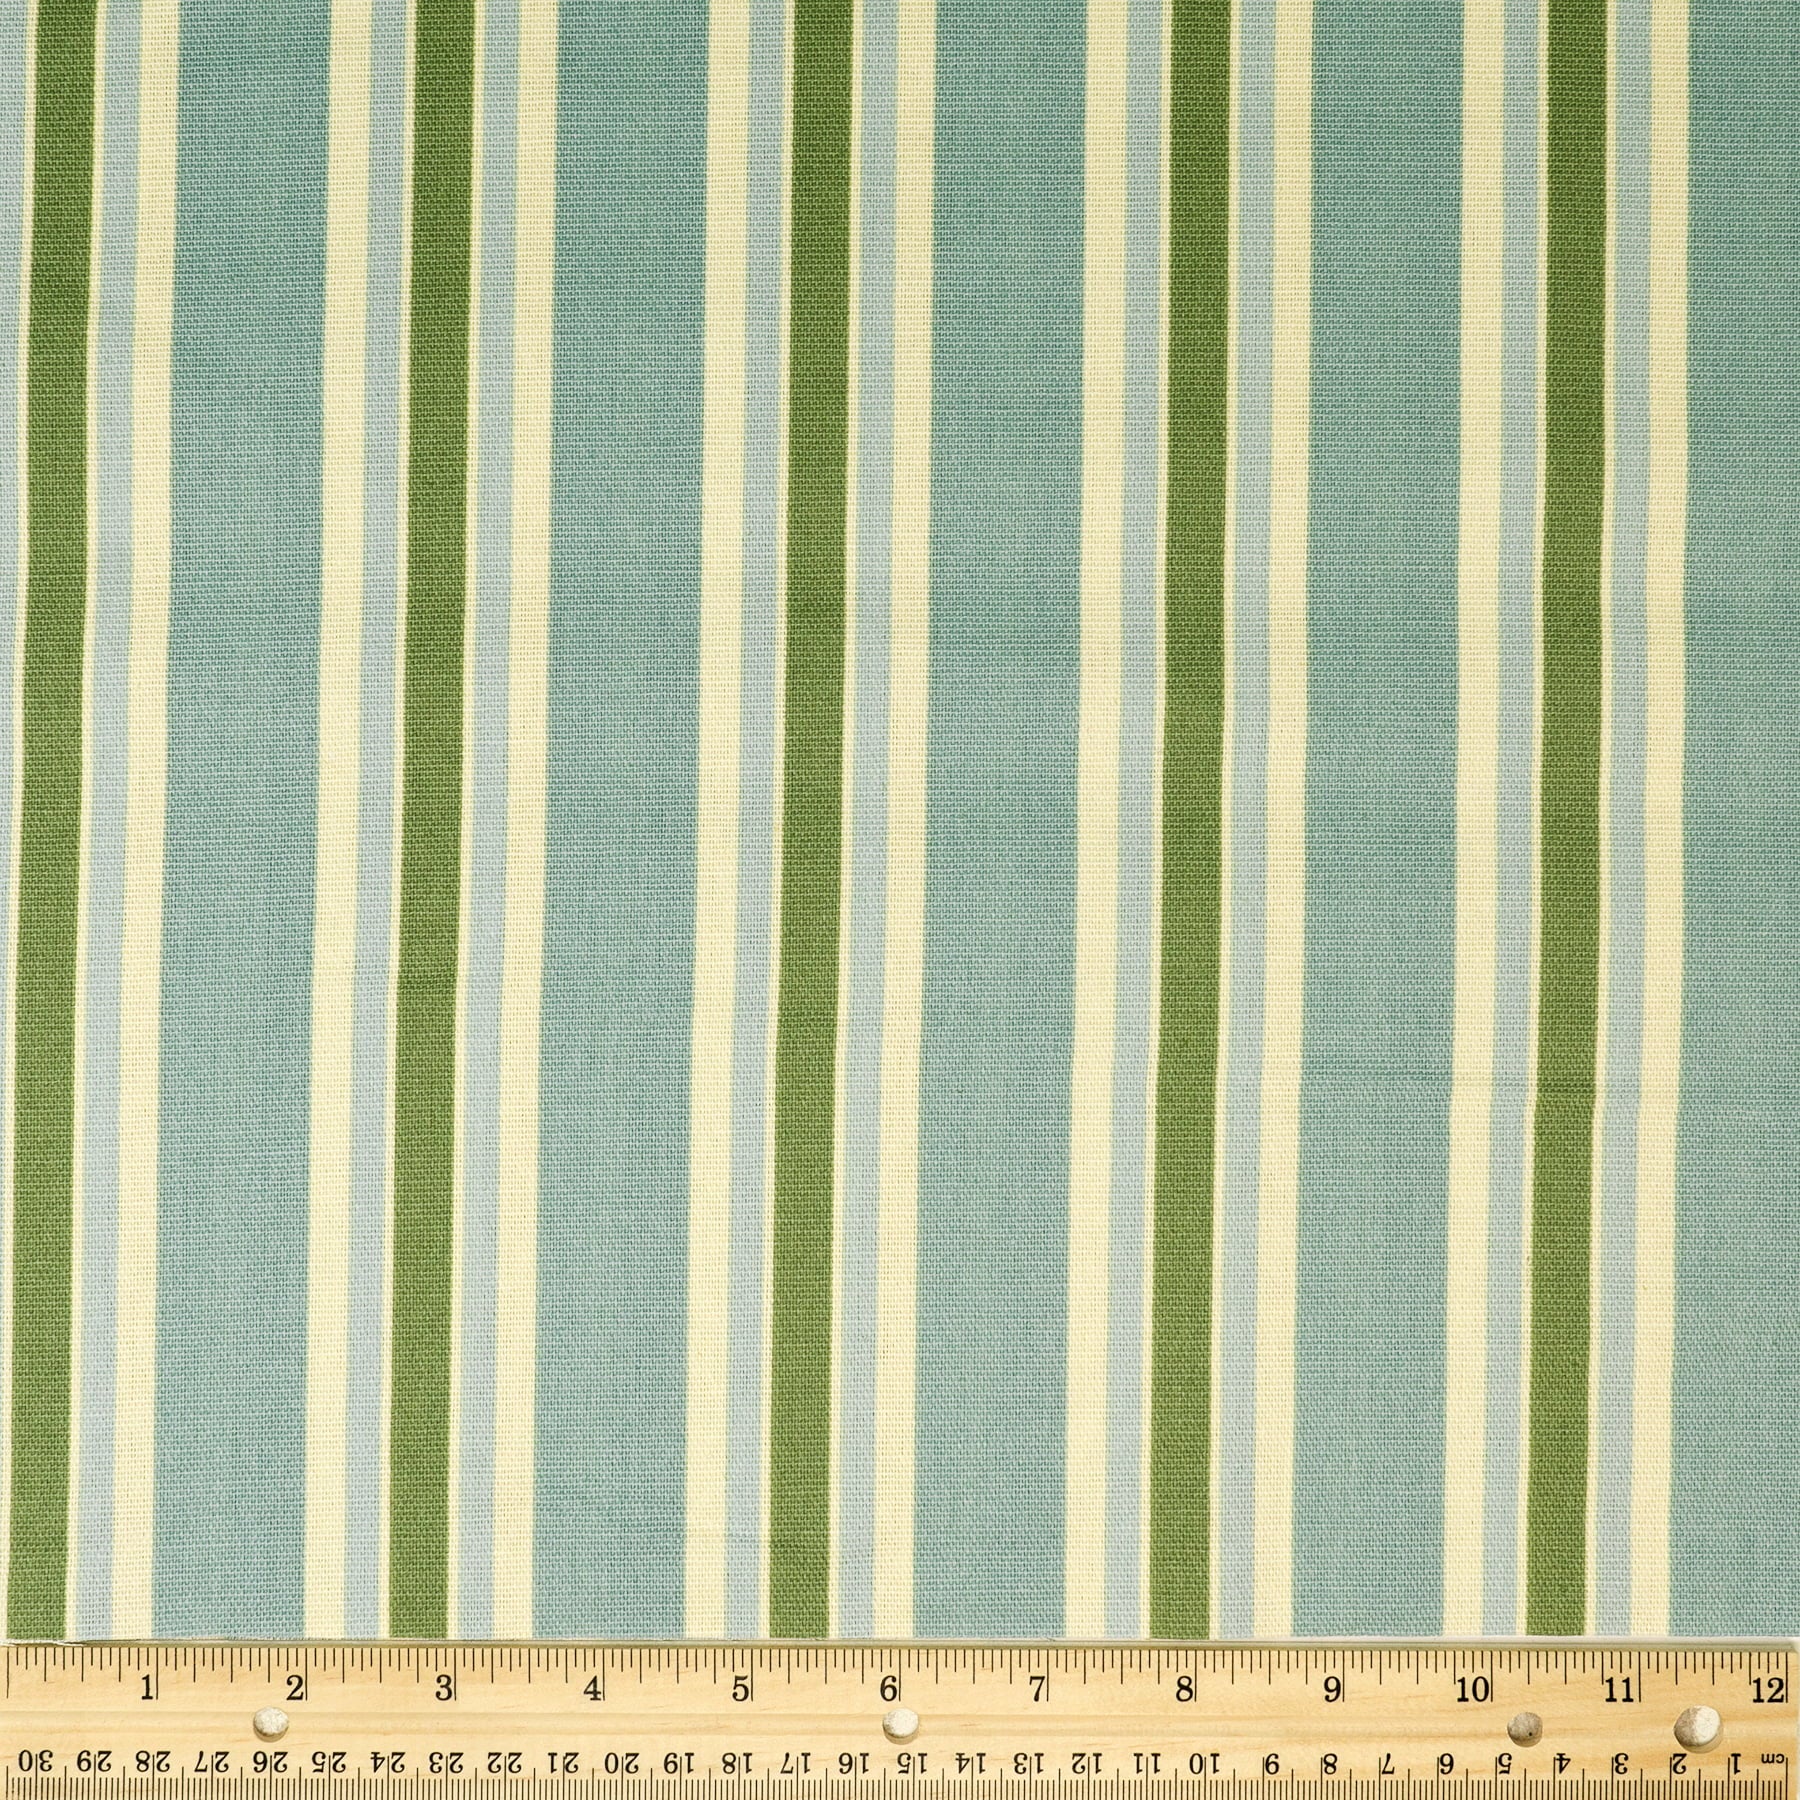 Waverly Inspirations 100% Cotton Duck 45" Width Dark Large Stripe Spa-Tan Color Sewing Fabric by the Yard